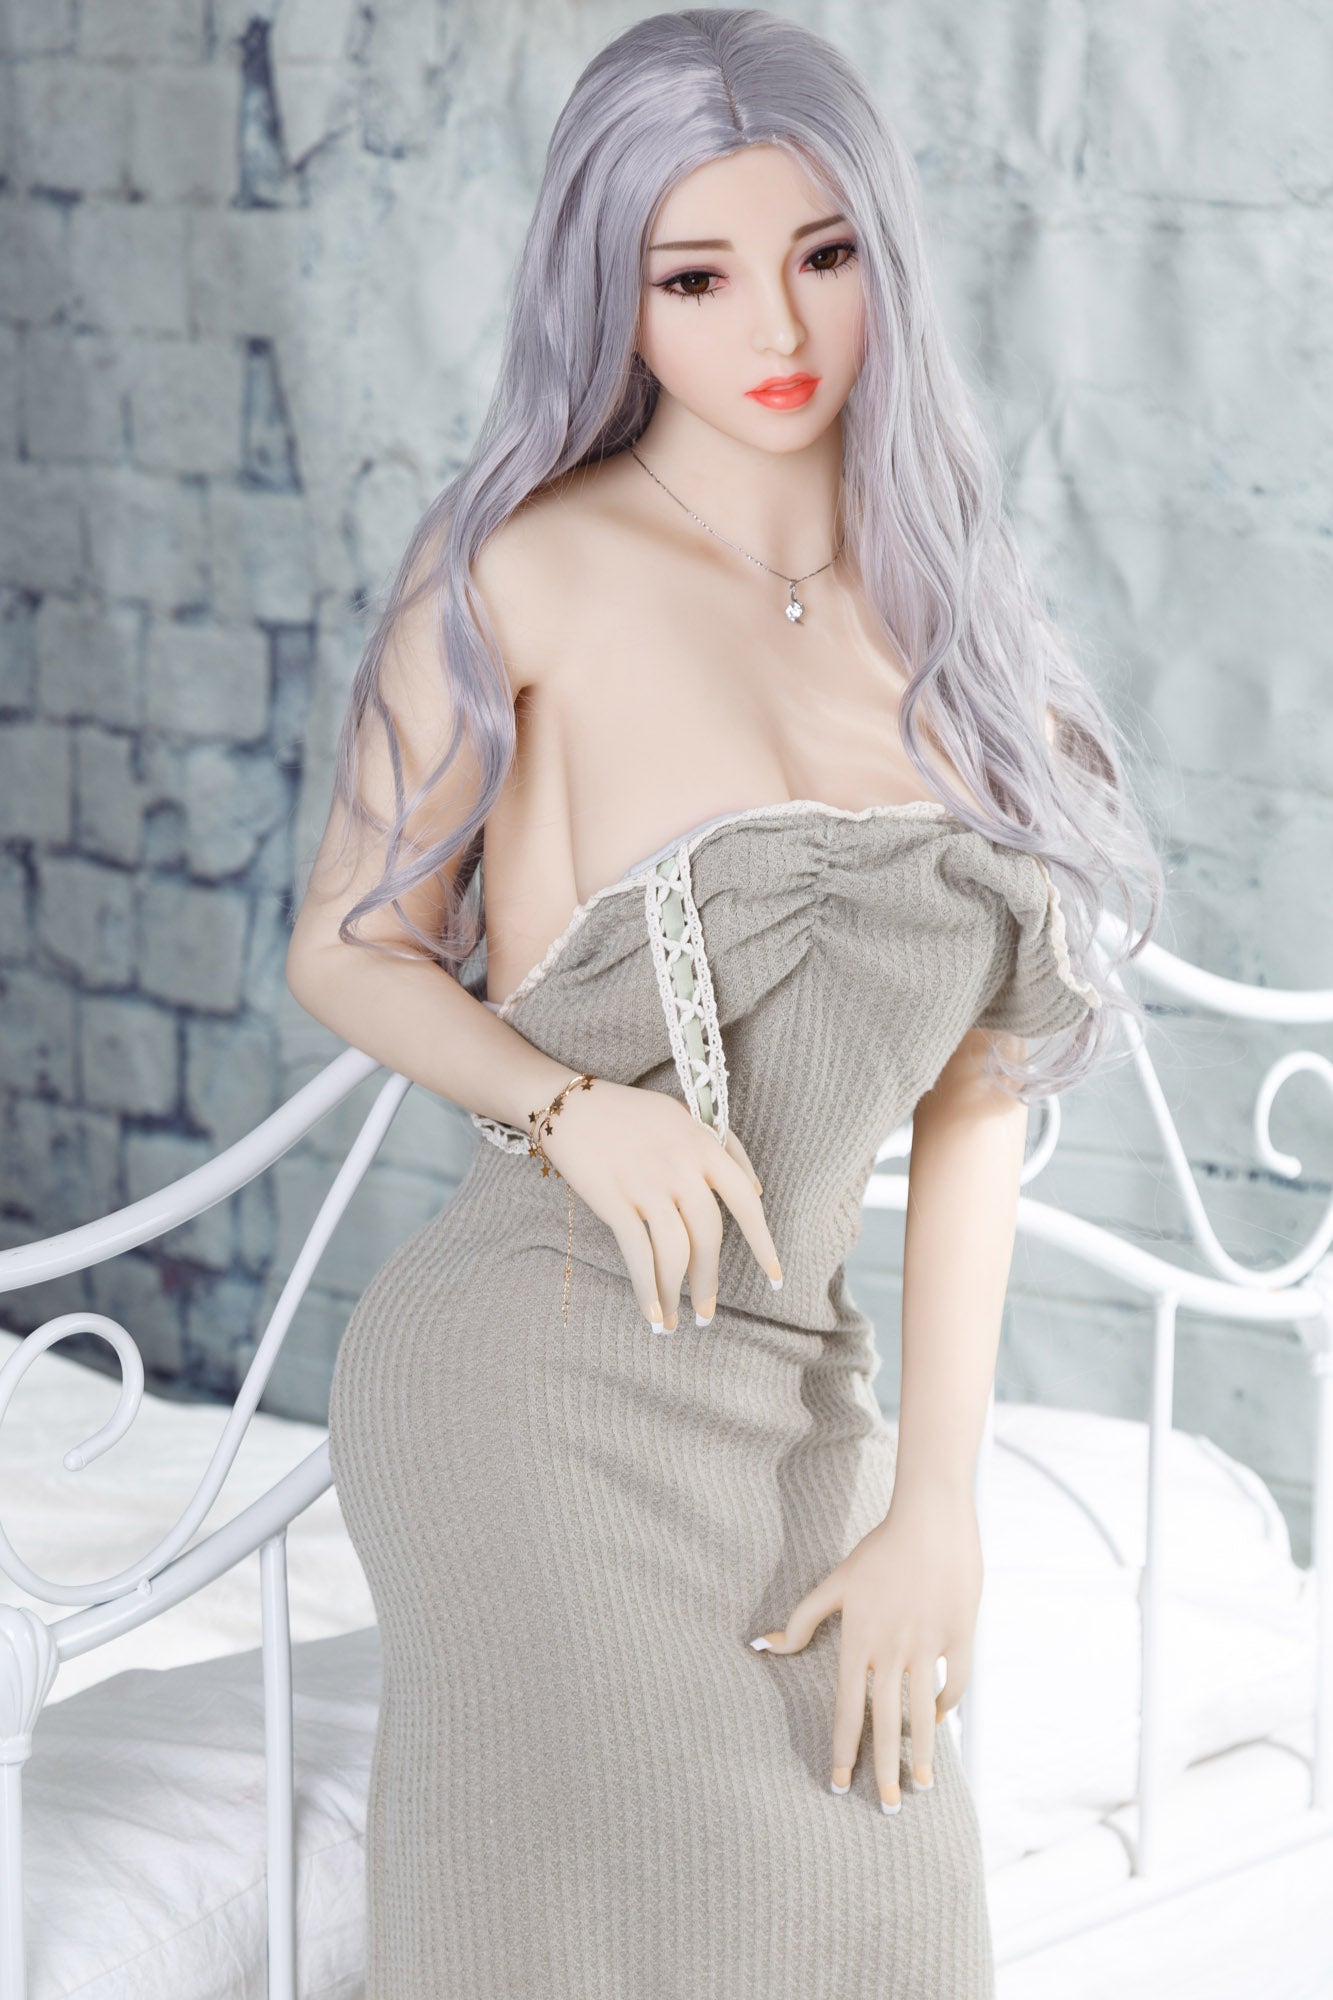 Realistic sex doll baby